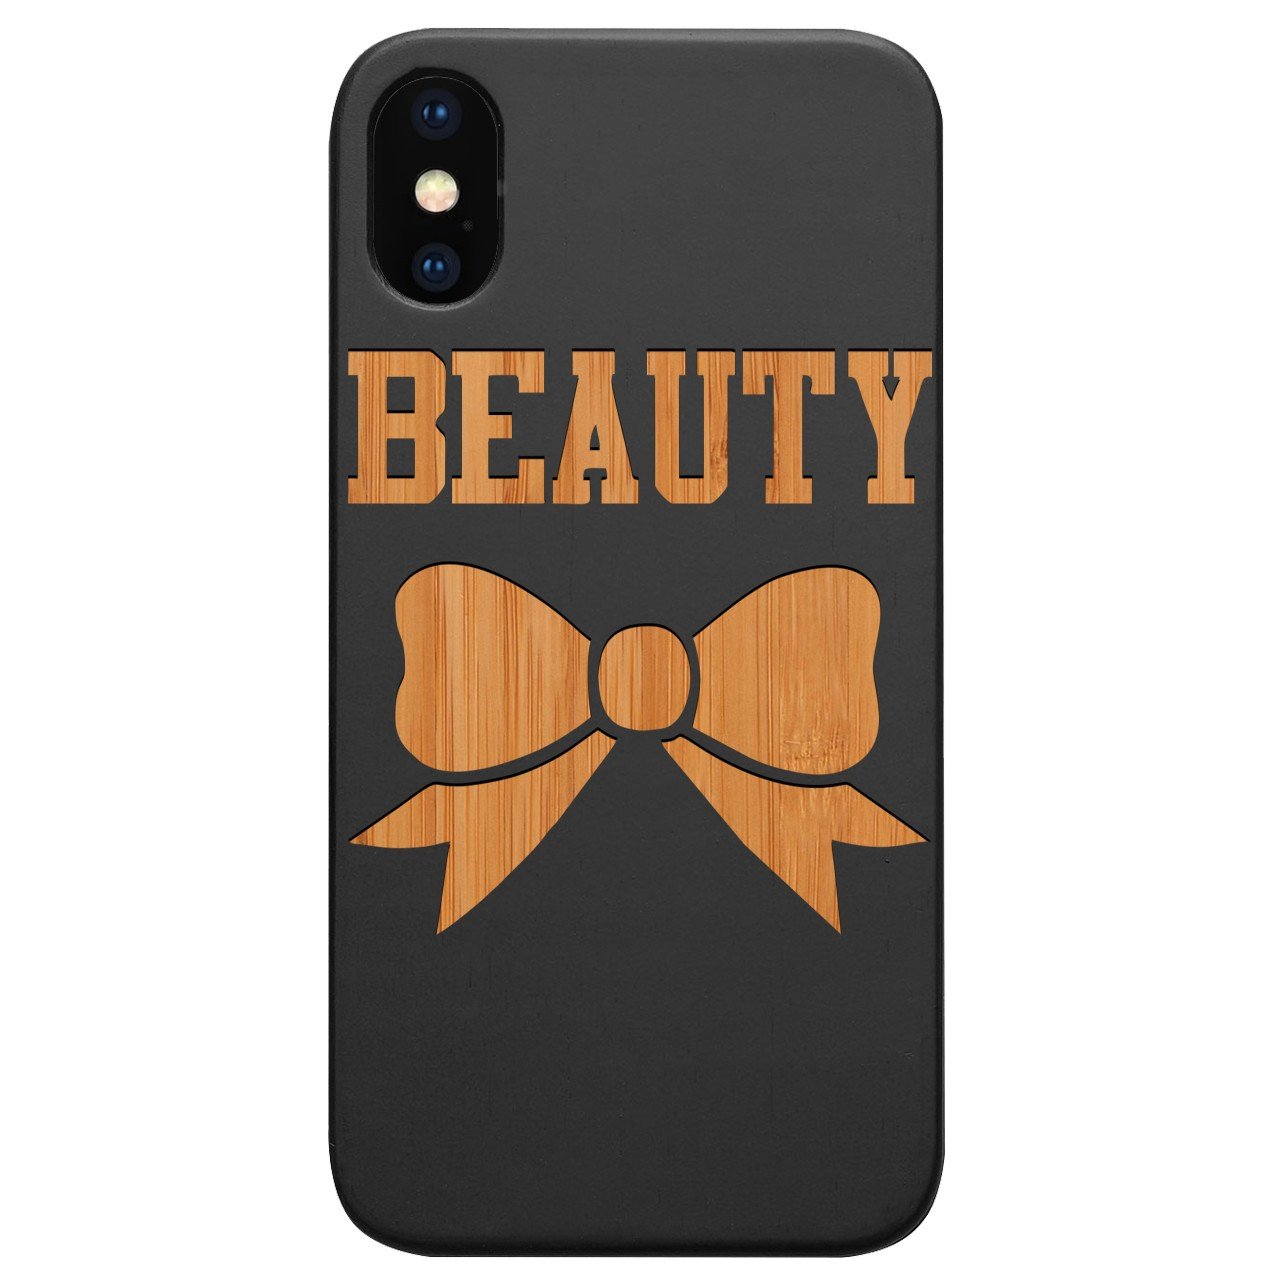 Beauty - Engraved - Wooden Phone Case